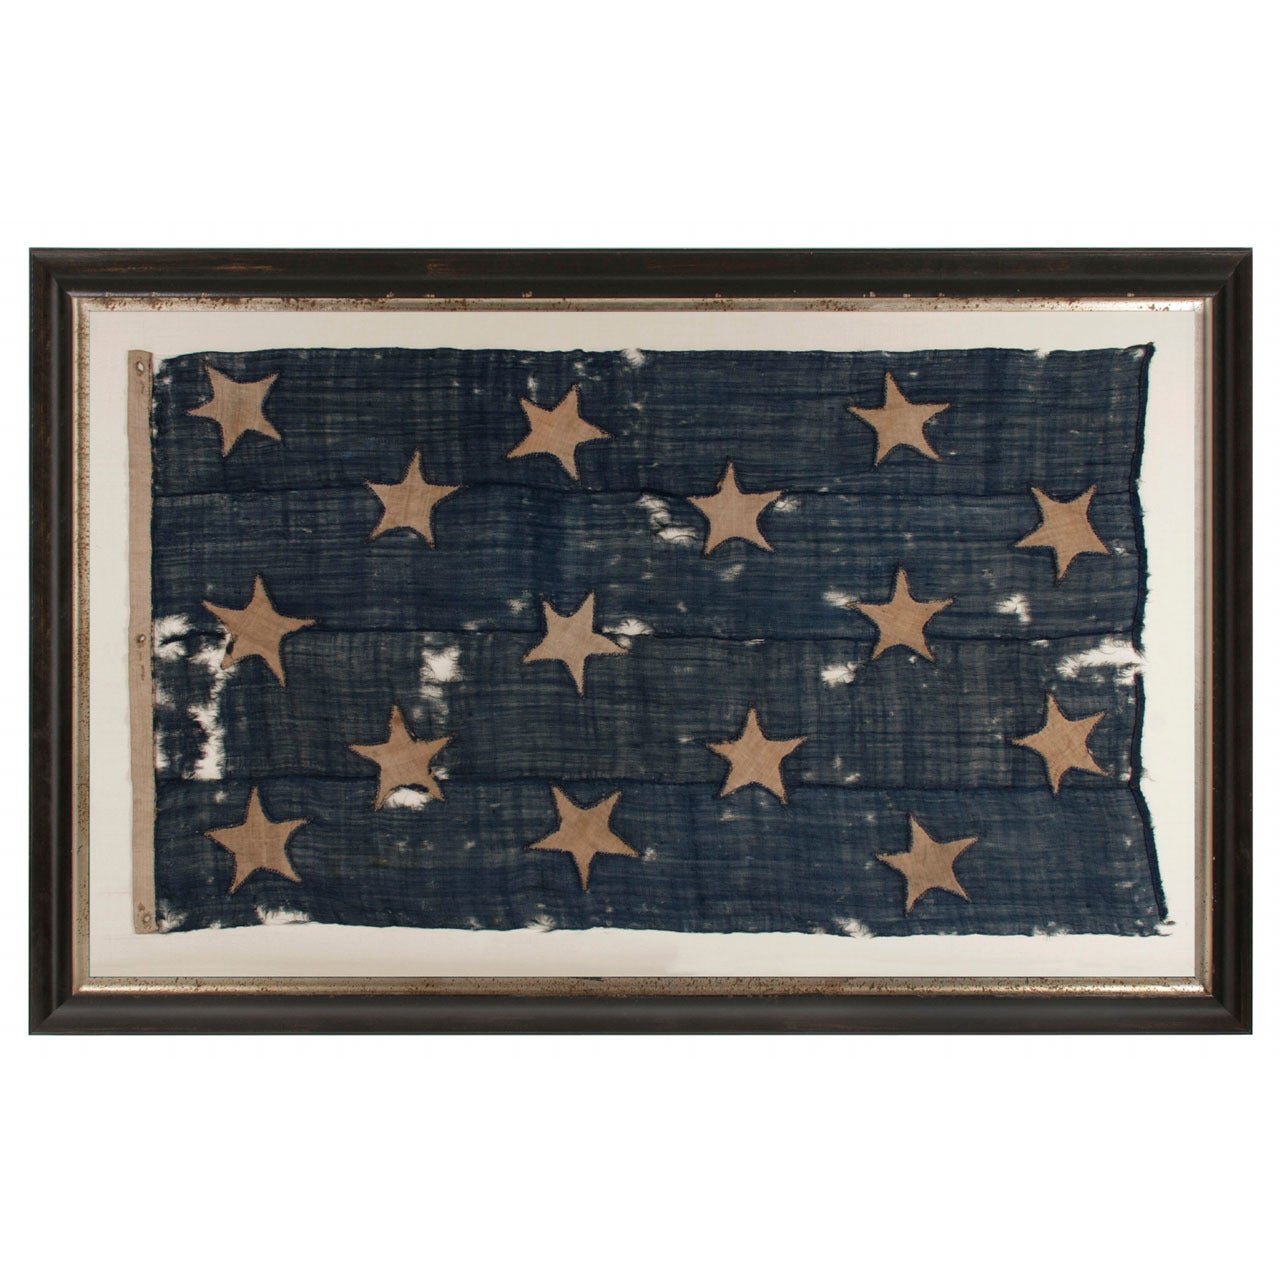 One Of the Earliest Flags in America: Authentic 15 Star US Navy Jack